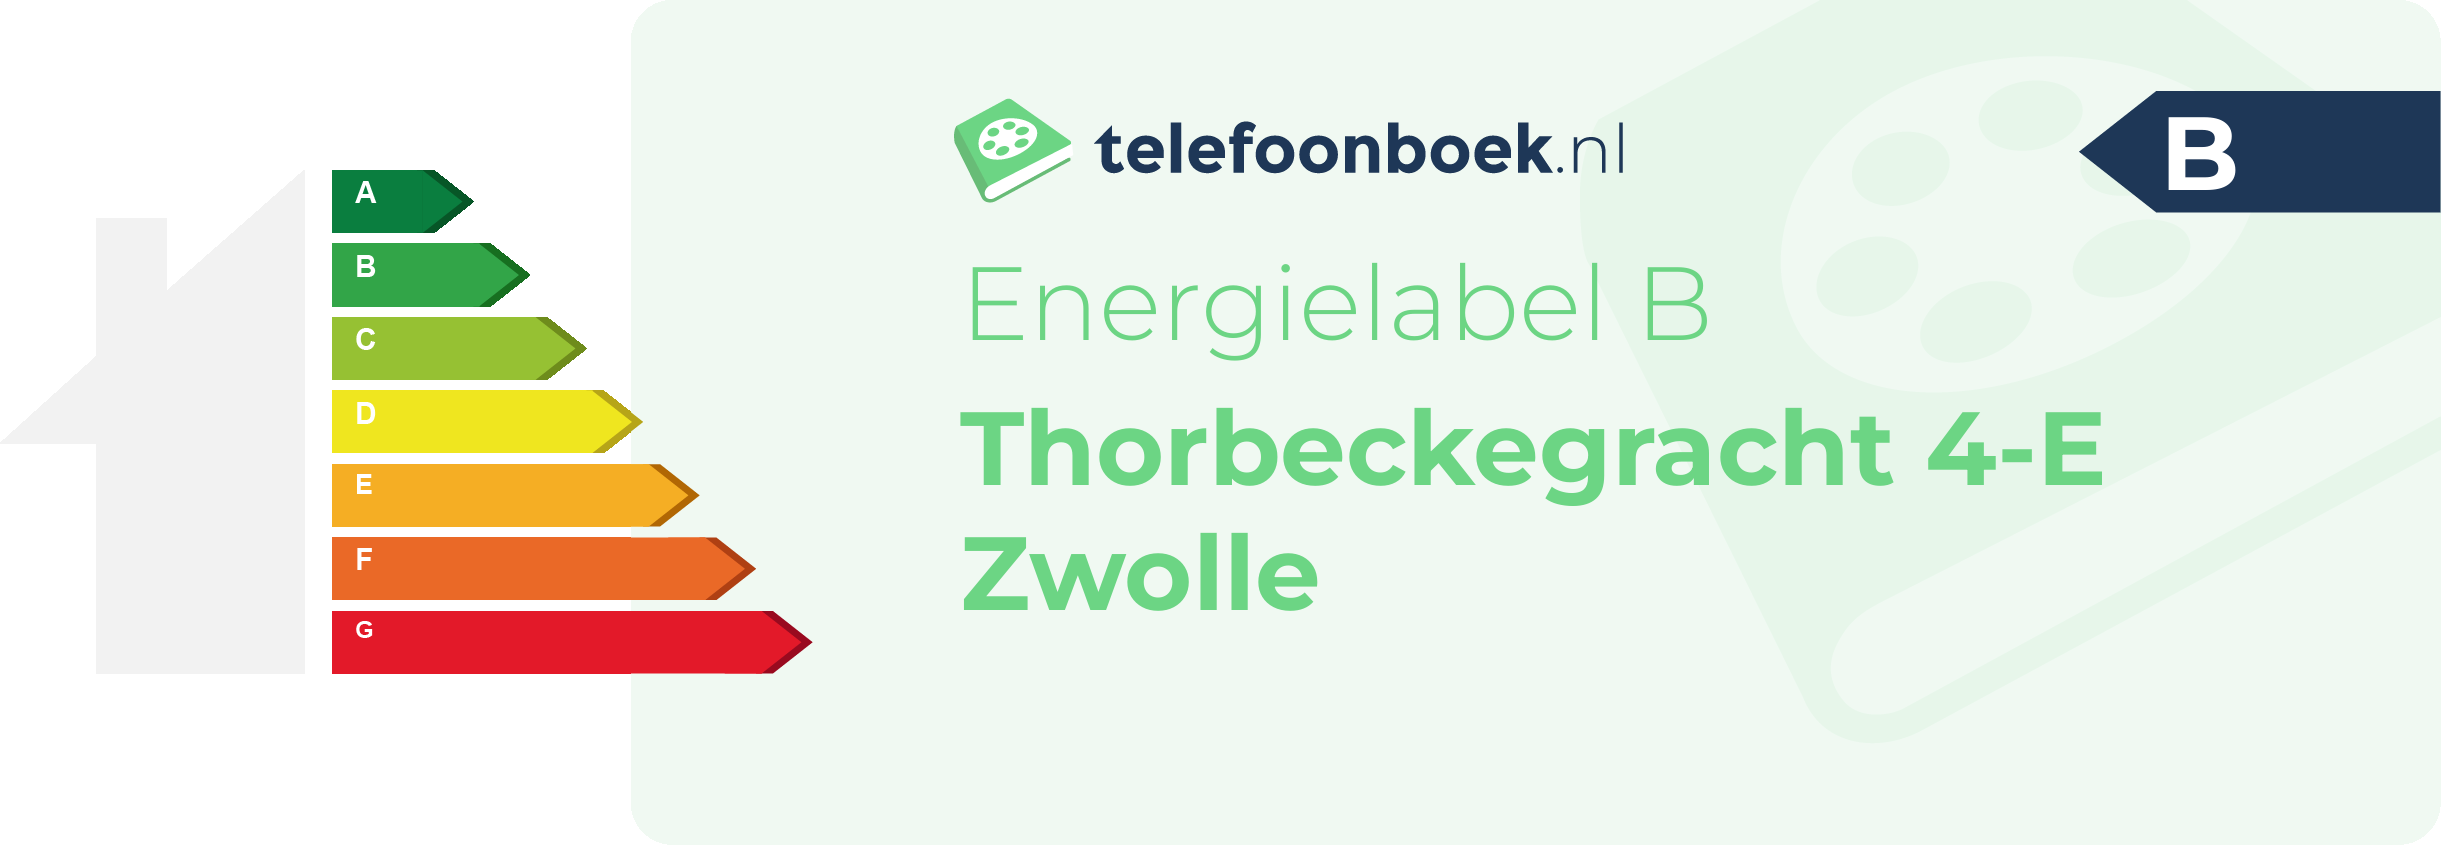 Energielabel Thorbeckegracht 4-E Zwolle